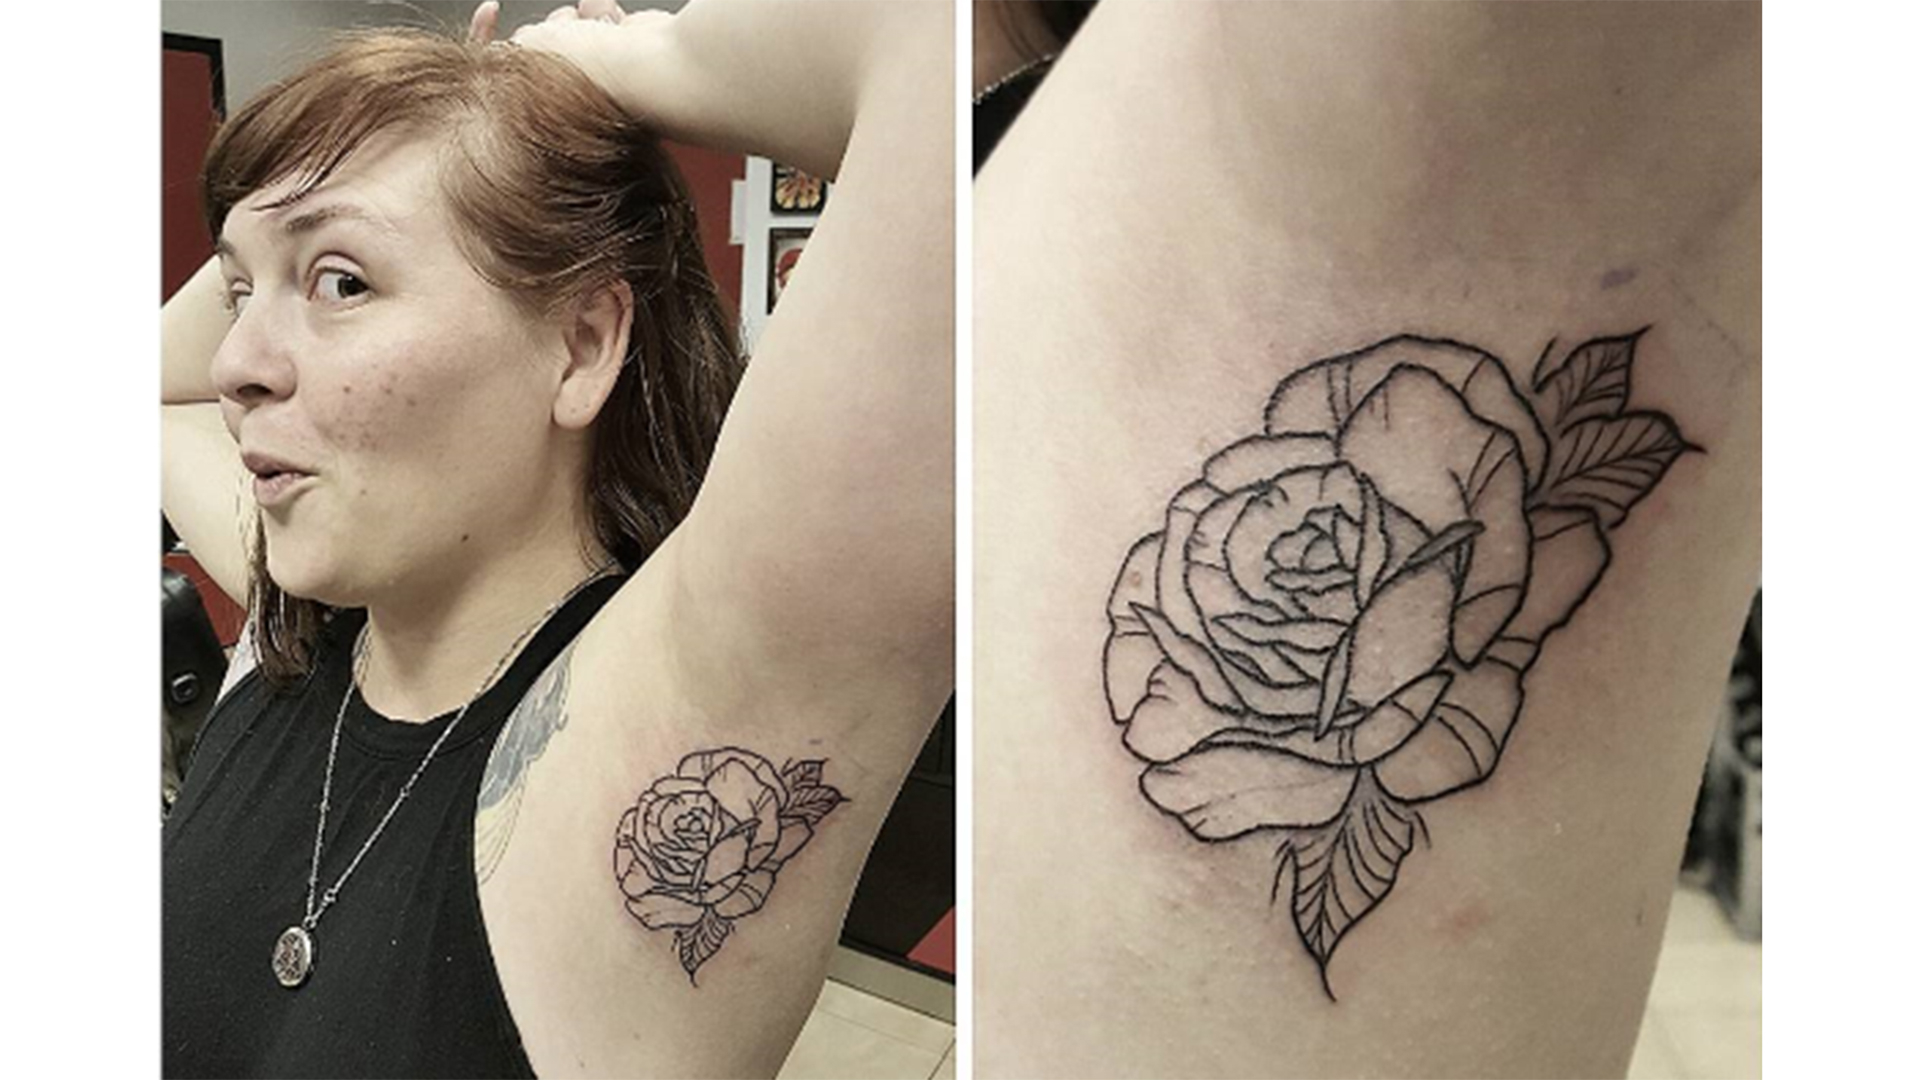 Armpit Tattoos Are The Latest Trend On Instagram regarding dimensions 1920 X 1080